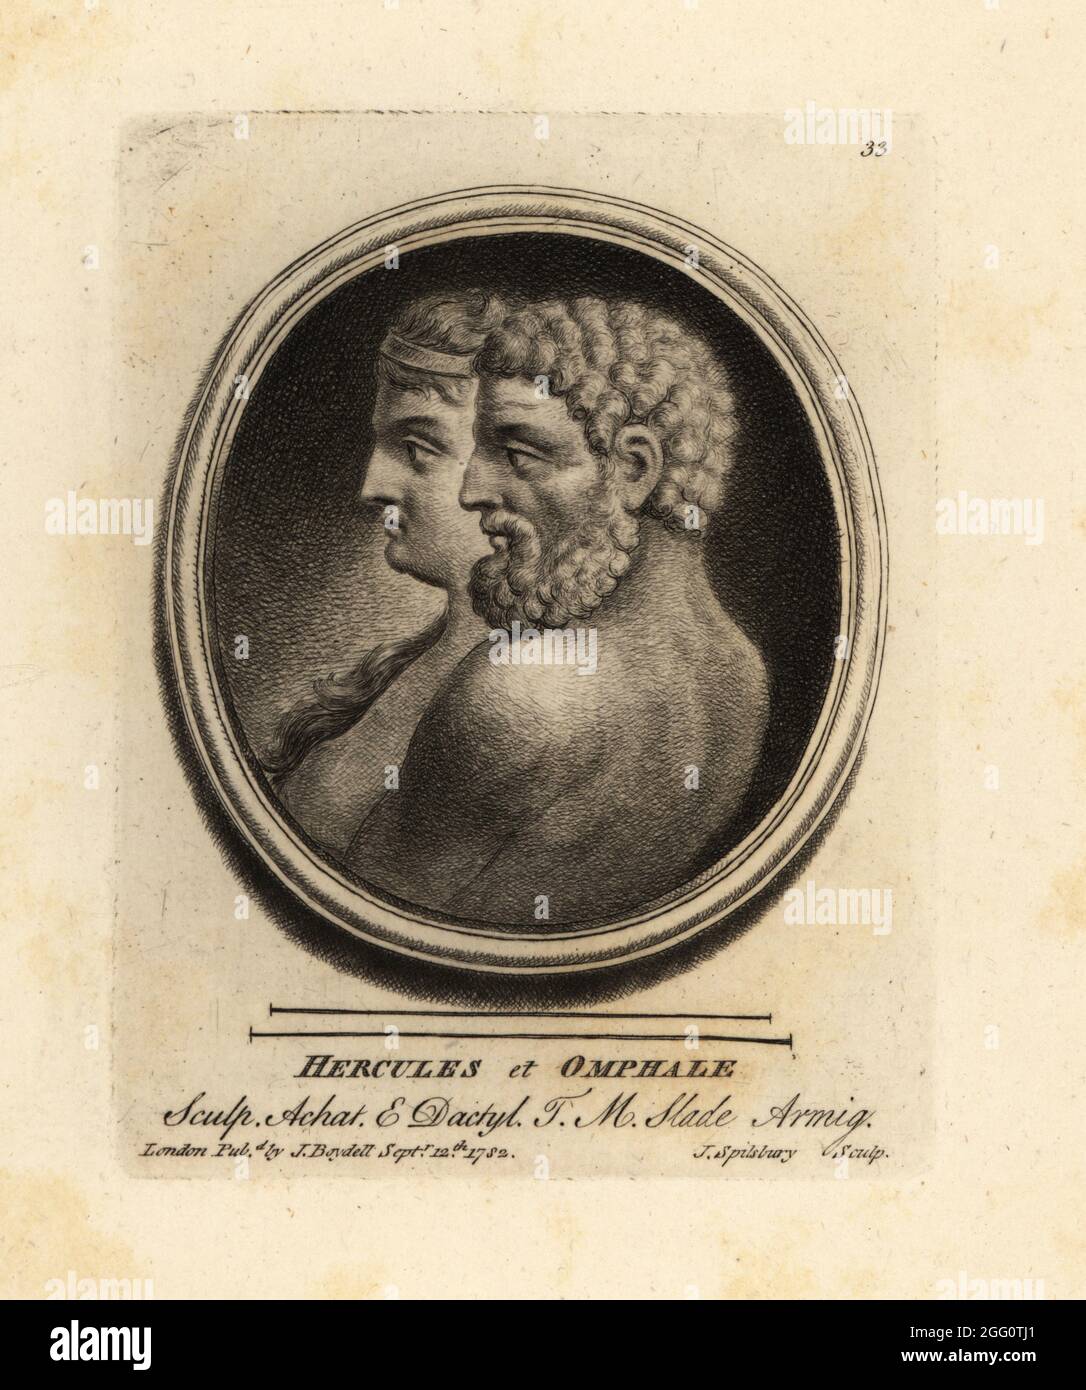 Greek hero Hercules and Omphale, Queen of Lydia. Engraved on agate and dactylotheca from the collection of the art dealer Thomas Moore Slade. Mezzotint copperplate engraving by John Spilsbury from his Collection of Fifty Prints from Antique Gems, John Boydell, London, 1785. Stock Photo